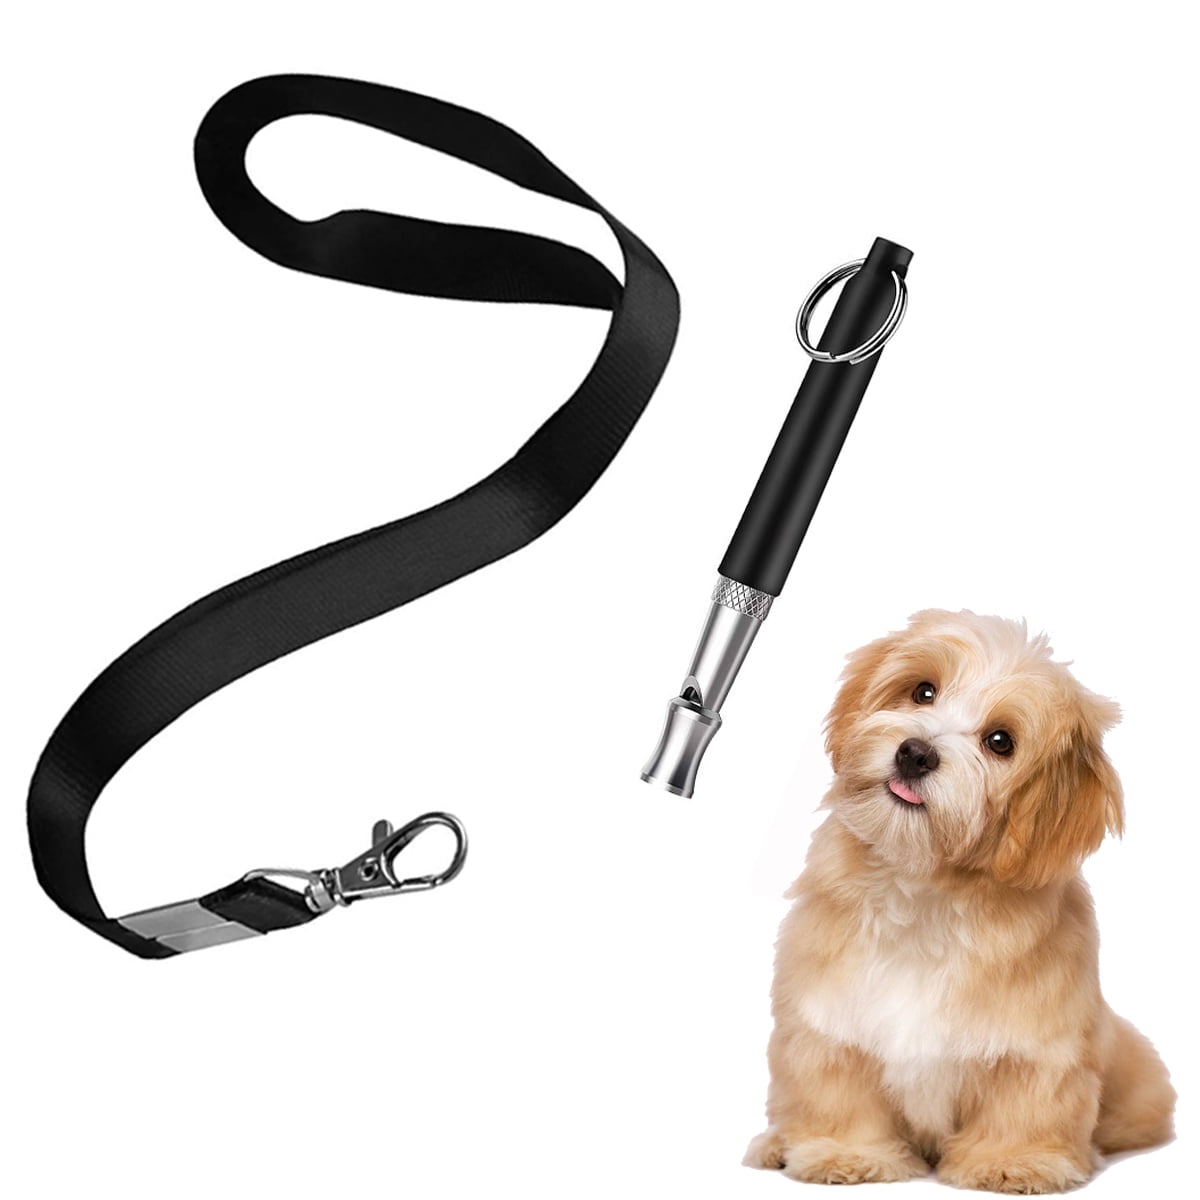 Ultrasonic Adjustable High Pitch Call Stop Barking Silent Dog Training Whistle 